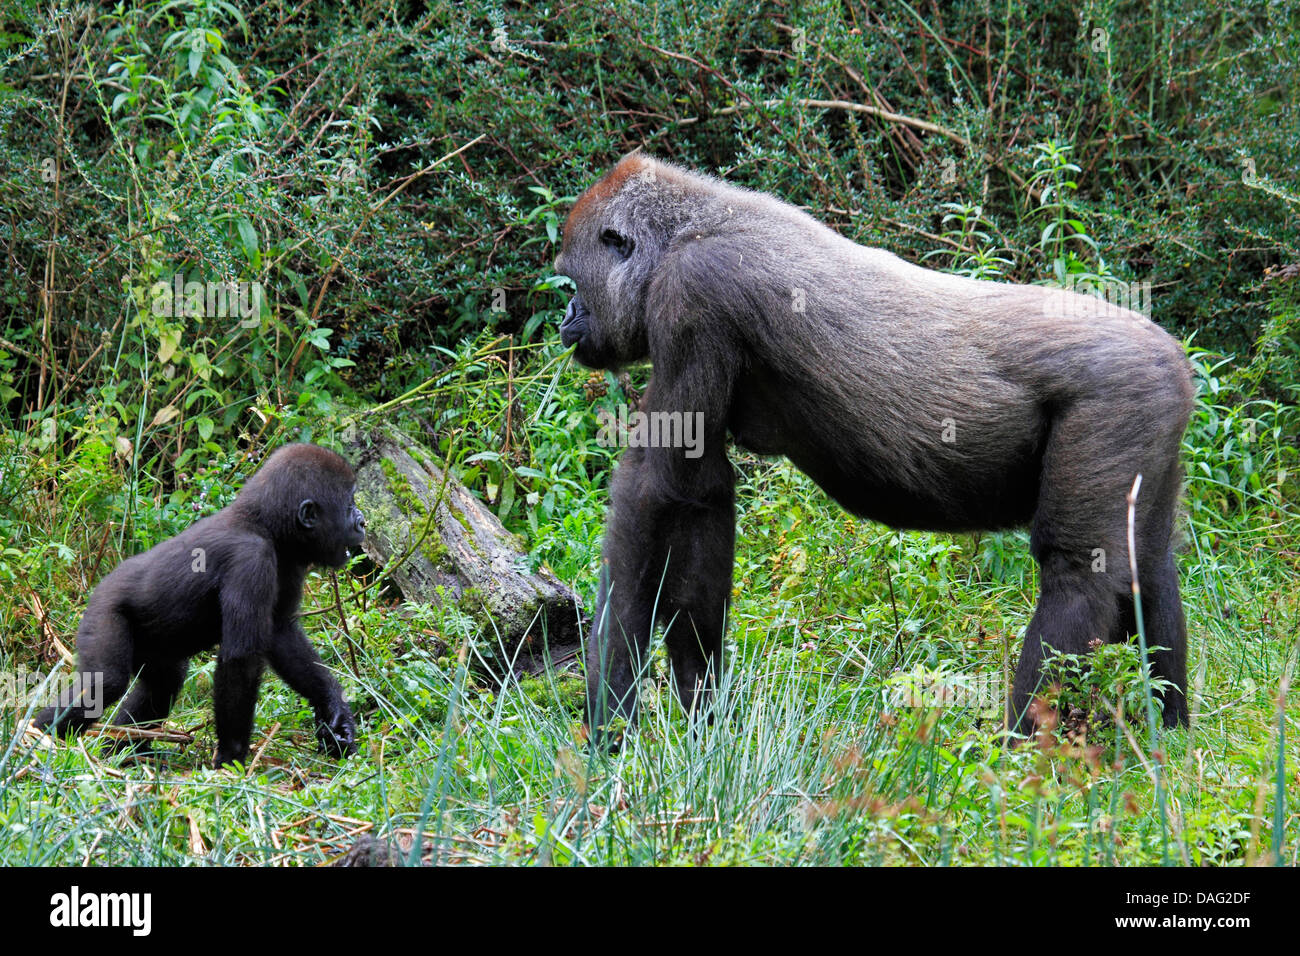 lowland gorilla (Gorilla gorilla gorilla), silver back with juvenile at the edge of a thicket Stock Photo